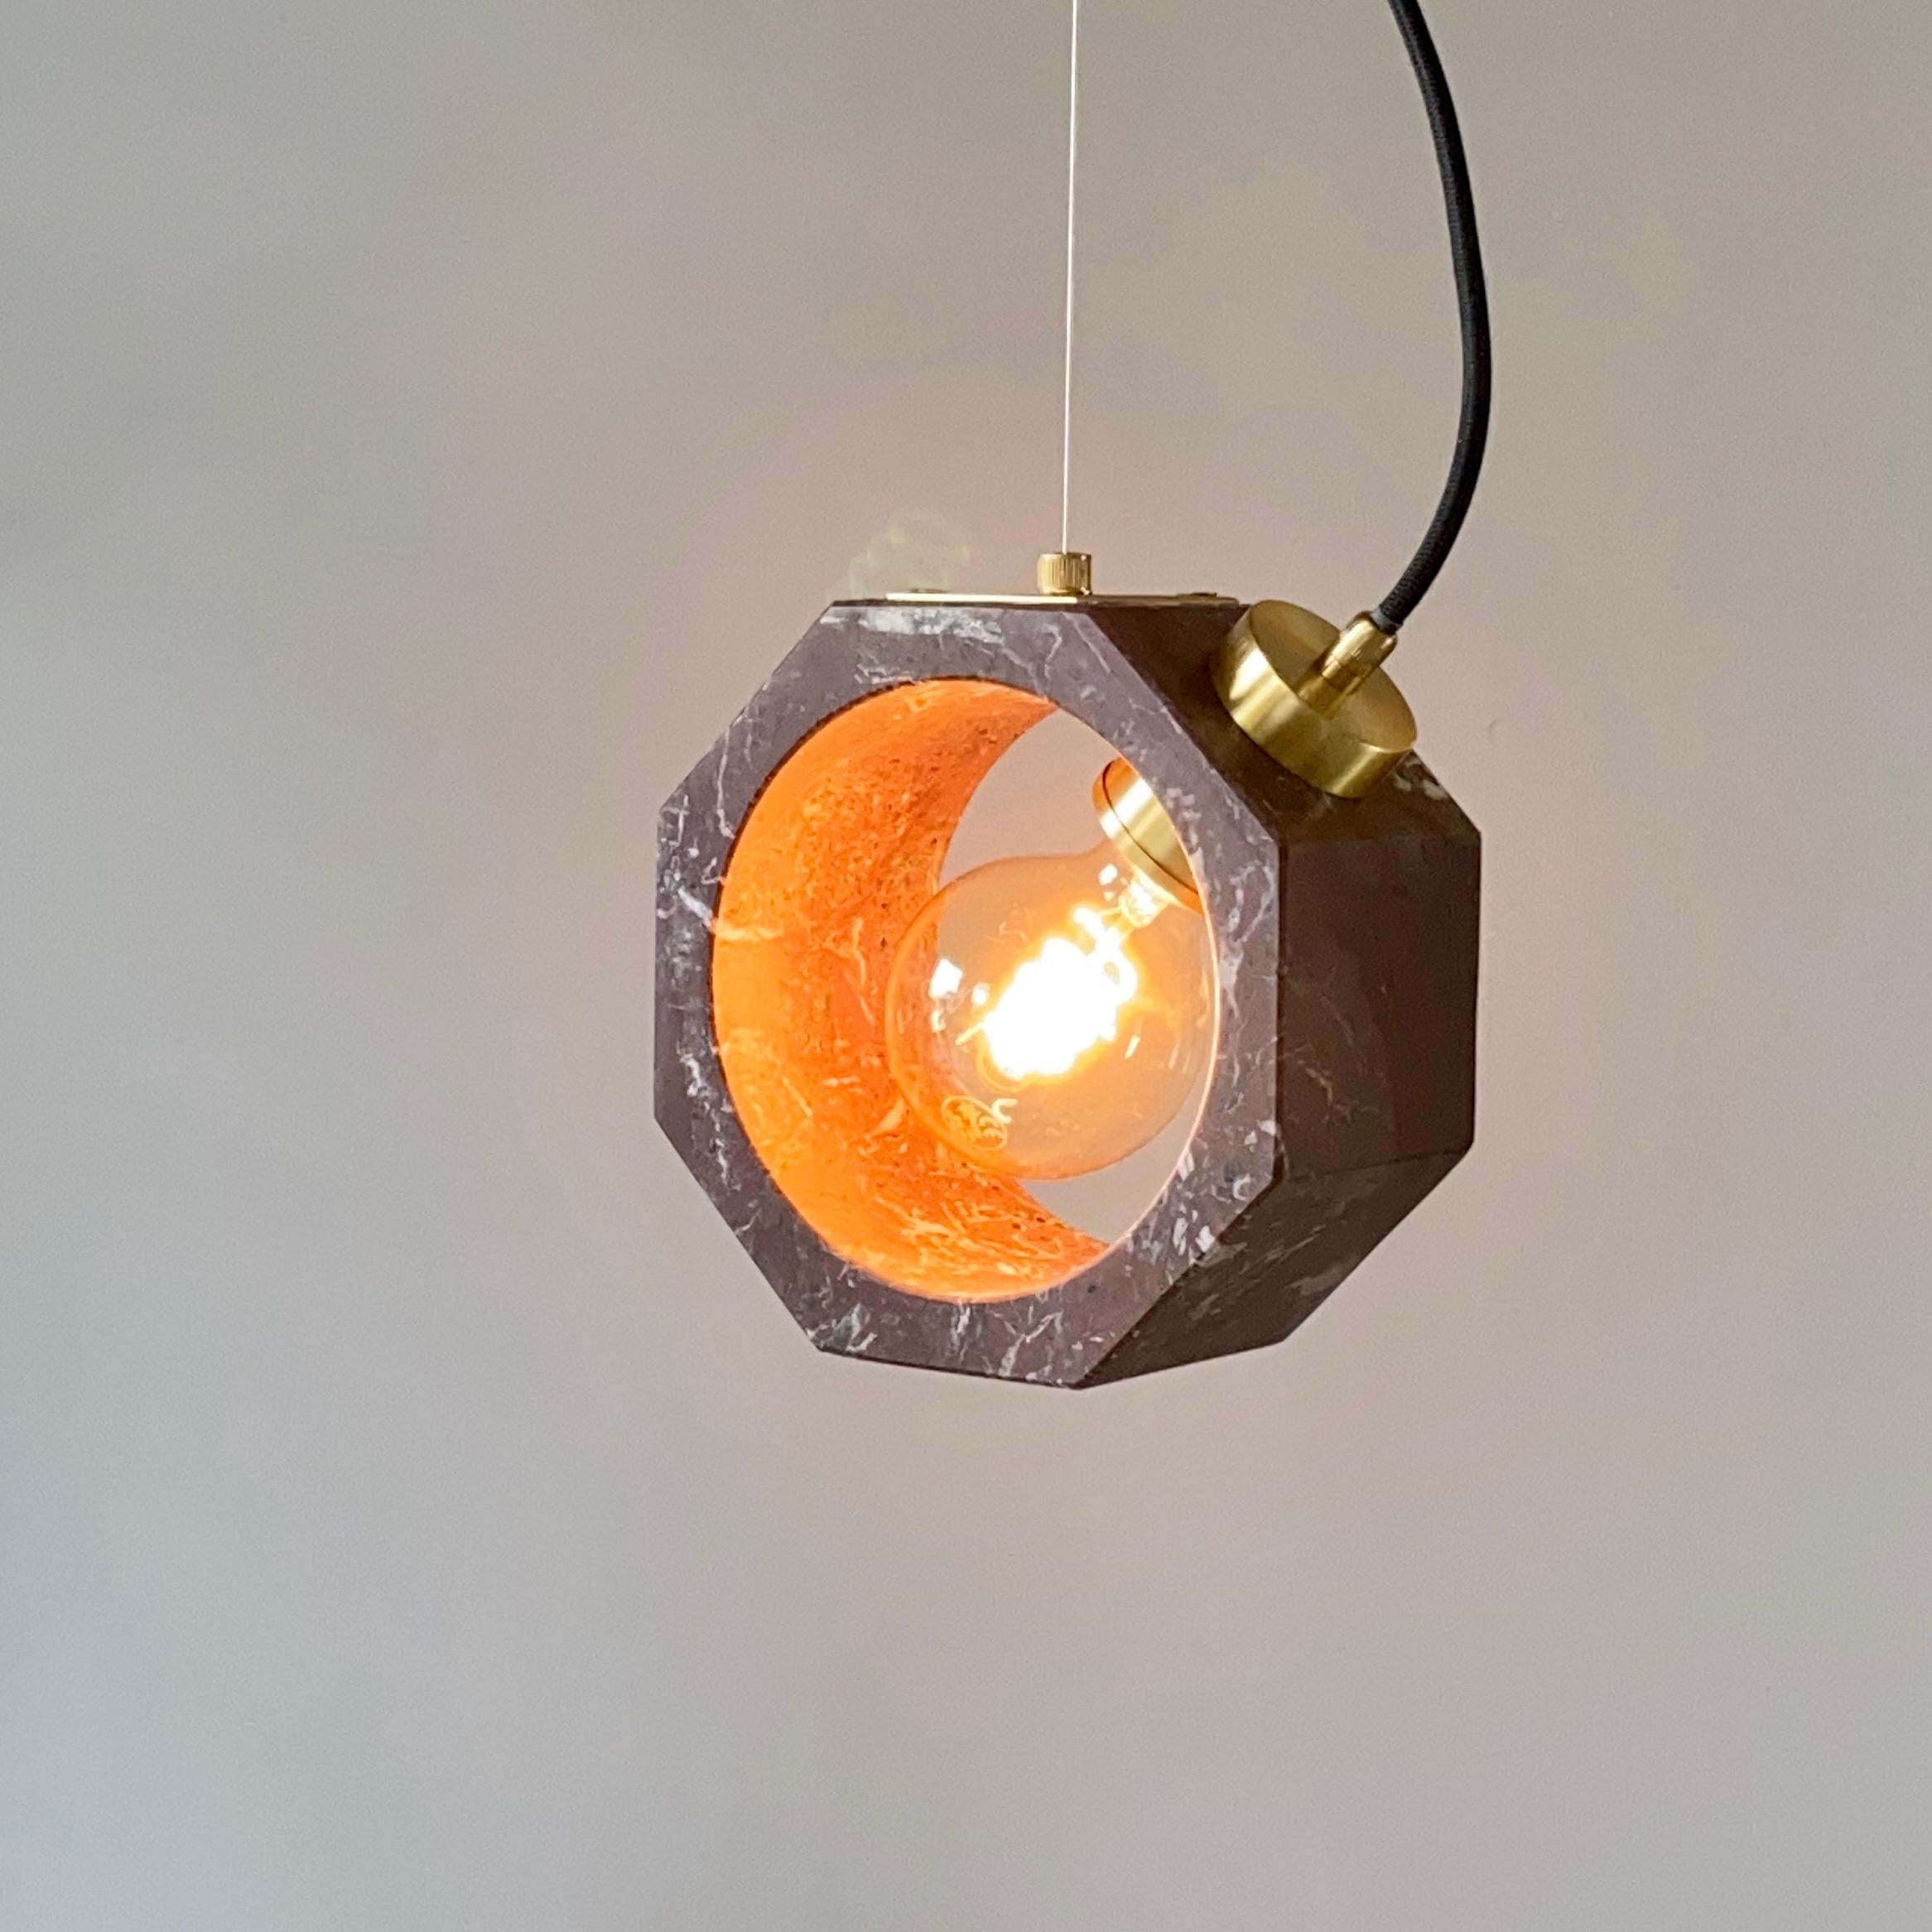 Cosulich interiors in collaboration with Matlight Studio: this pendant, part of the Italian Octagon collection, entirely handmade in Italy, has been developed keeping the essentiality as the core of the product, an organic monolithic block of red